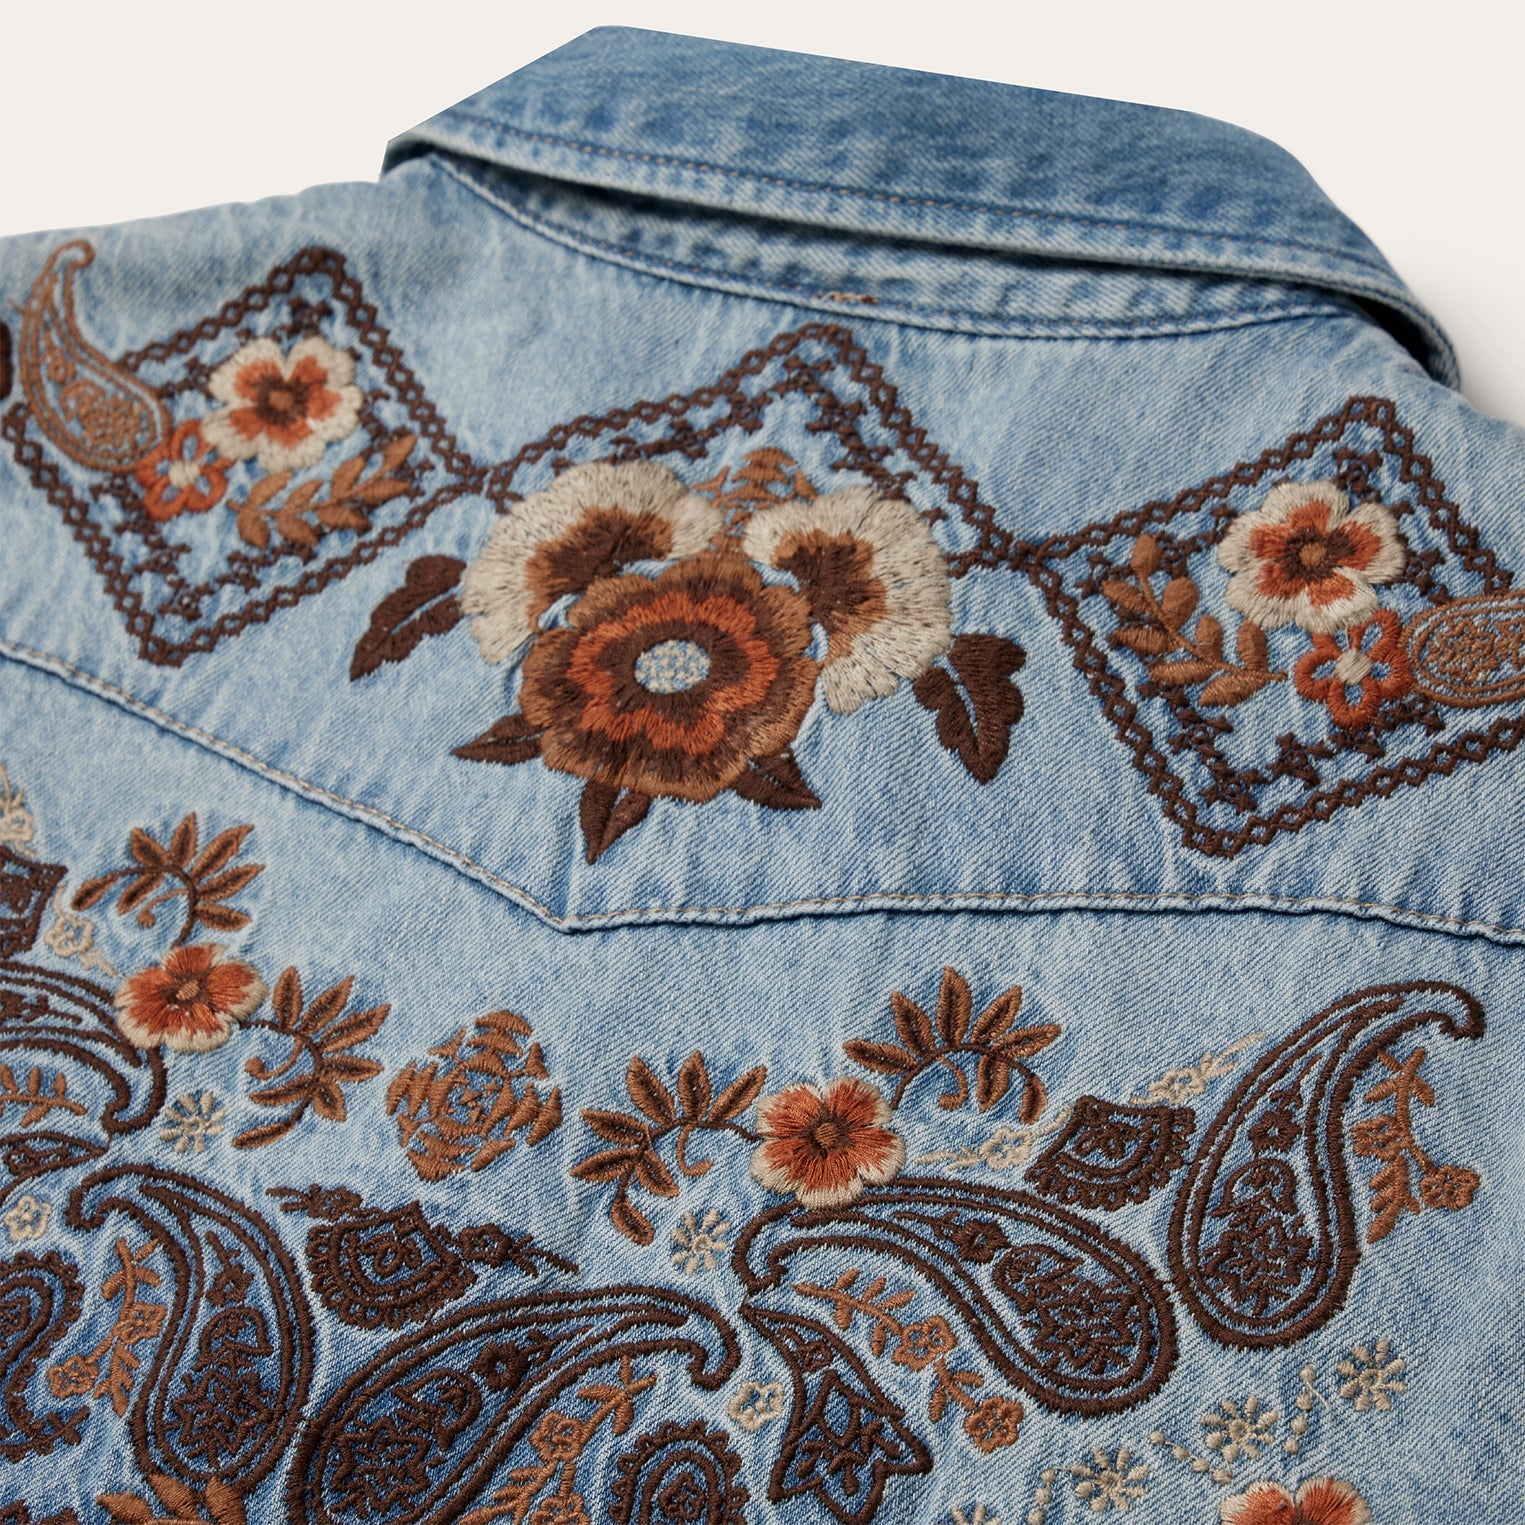 Floral Embroidered Denim Shirt Dress by Stetson